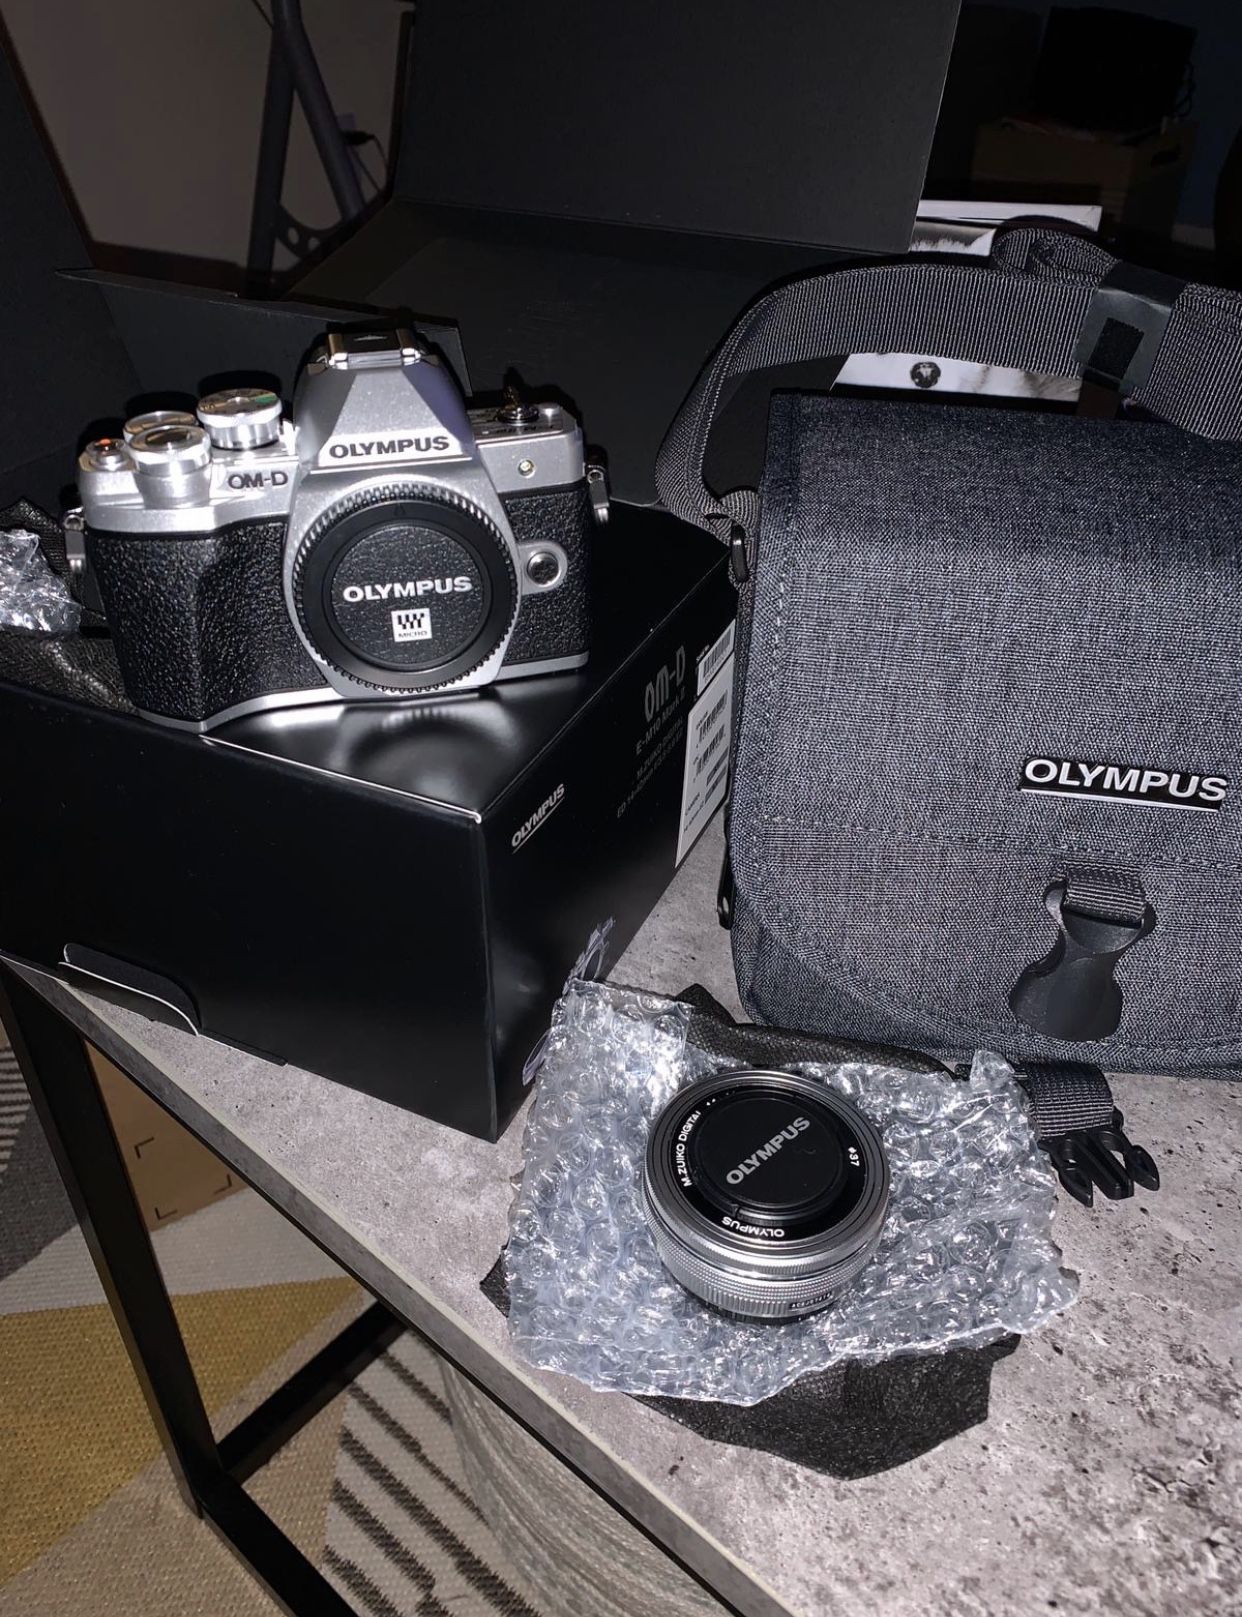 OLYMPUS CAMERA Kit with 14-42mm EZ Lens (Silver) AND with an additional M.Zuiko Digital 25mm F1.8 Lens!